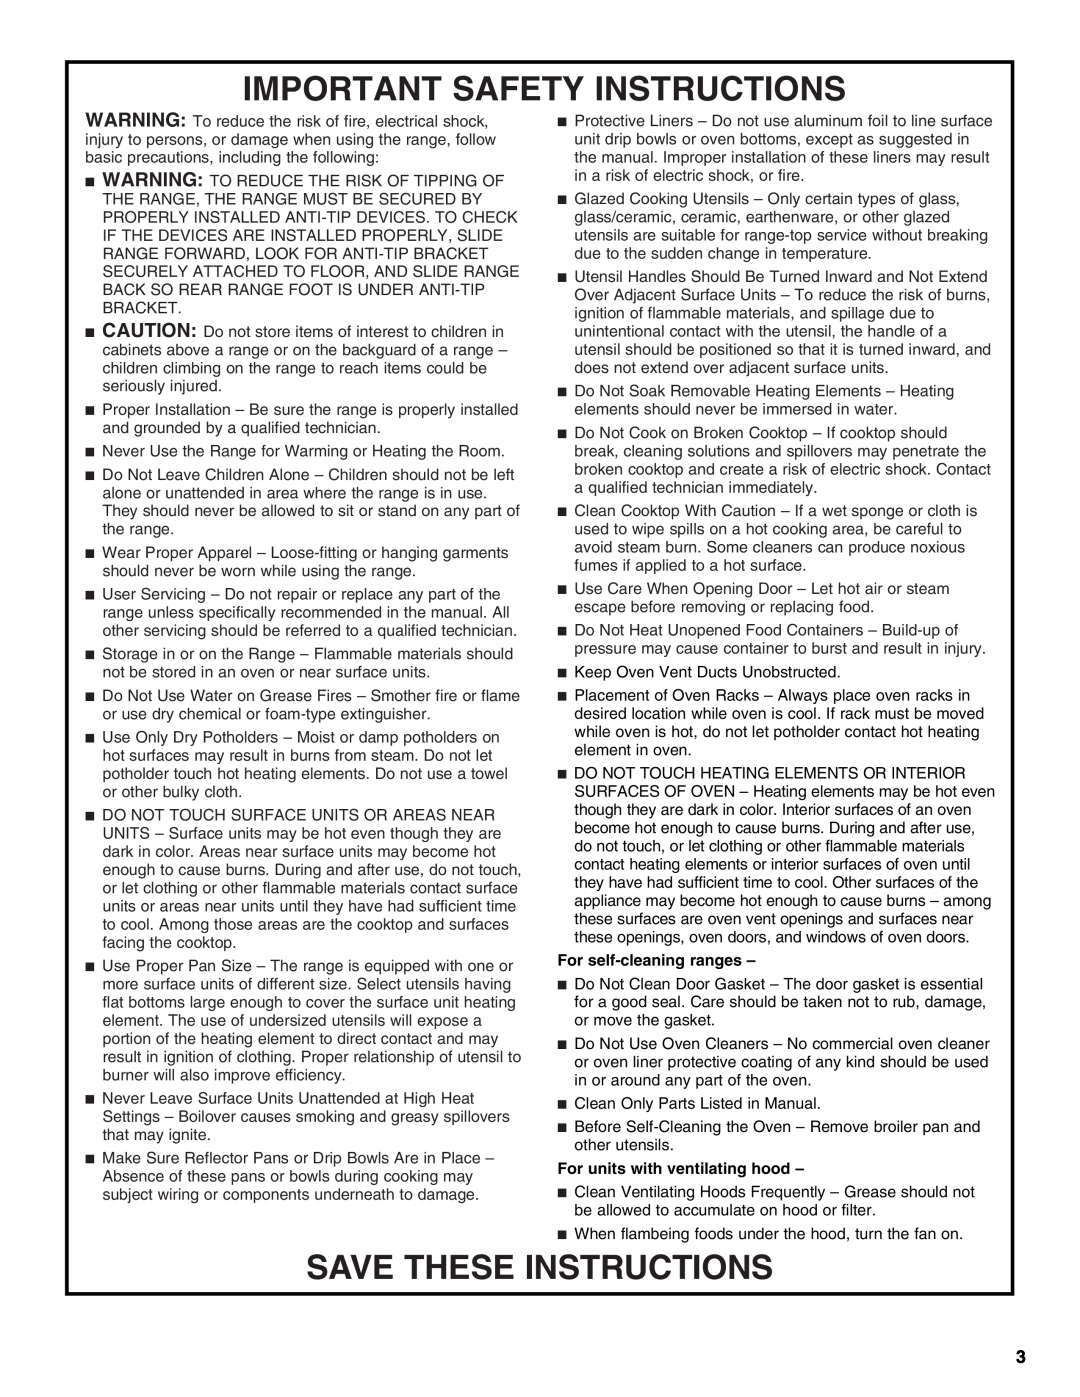 Whirlpool W10200359C warranty Important Safety Instructions, Save These Instructions, For self-cleaning ranges 